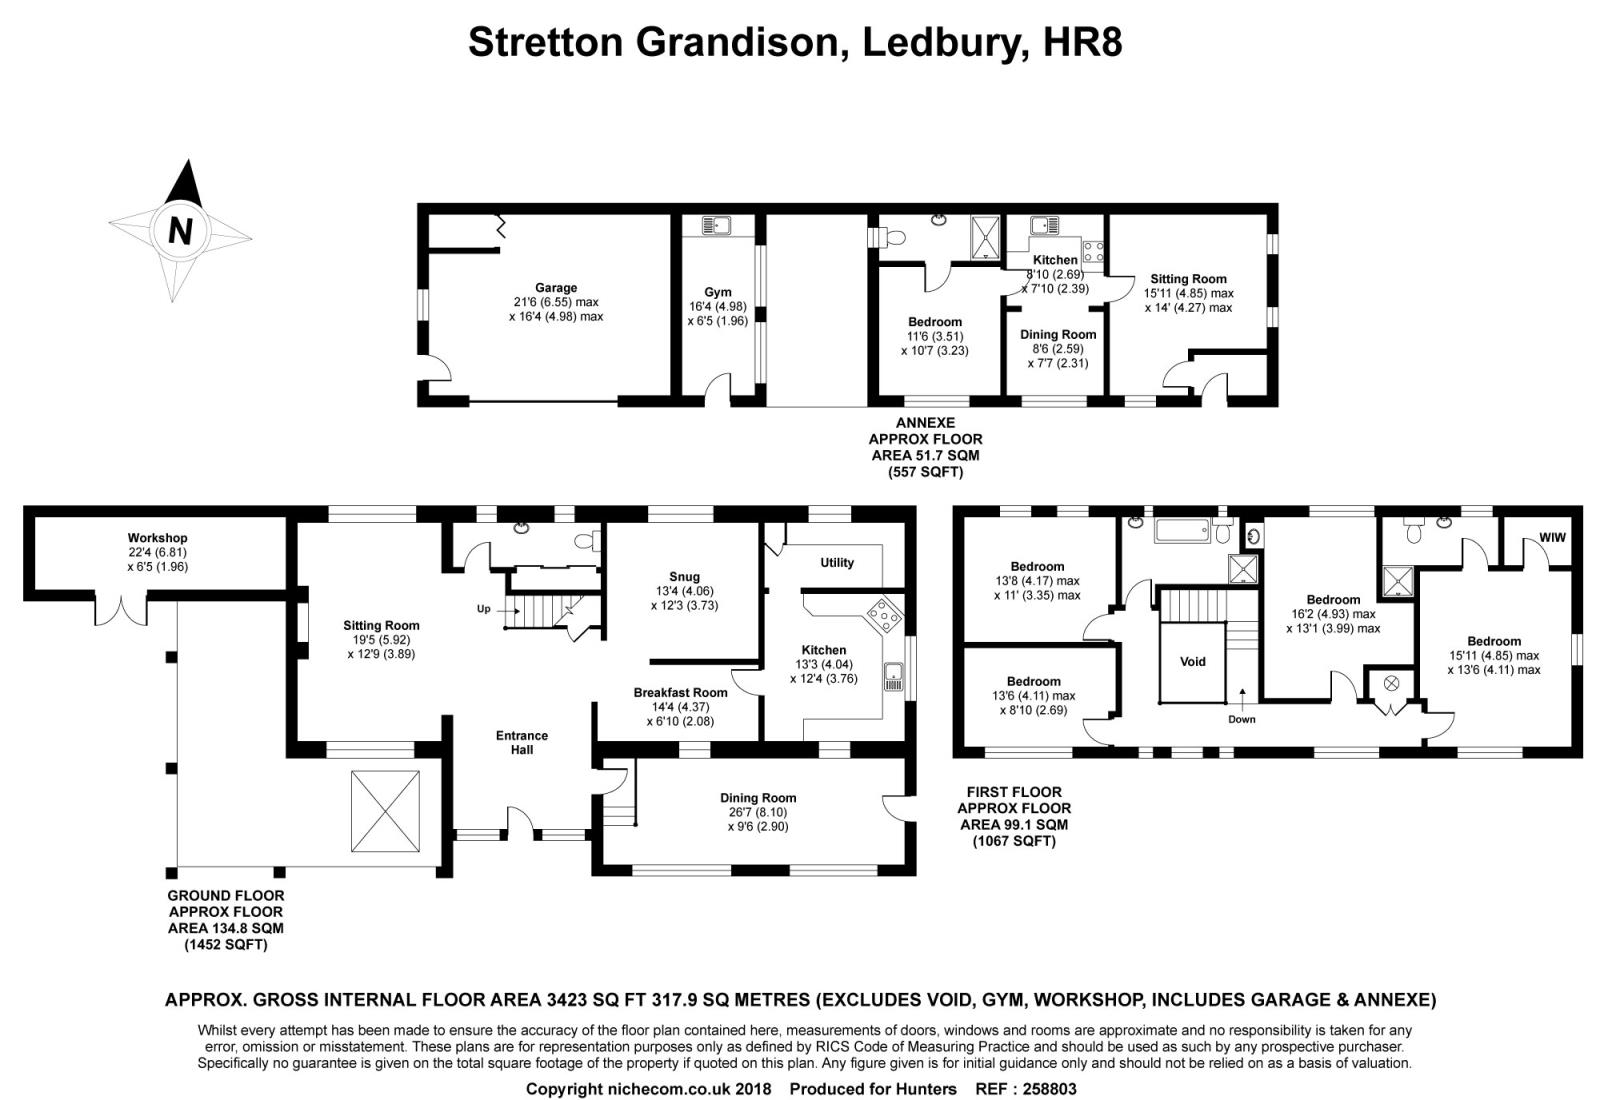 4 Bedrooms Detached house for sale in Stretton Grandison, Ledbury, Herefordshire HR8